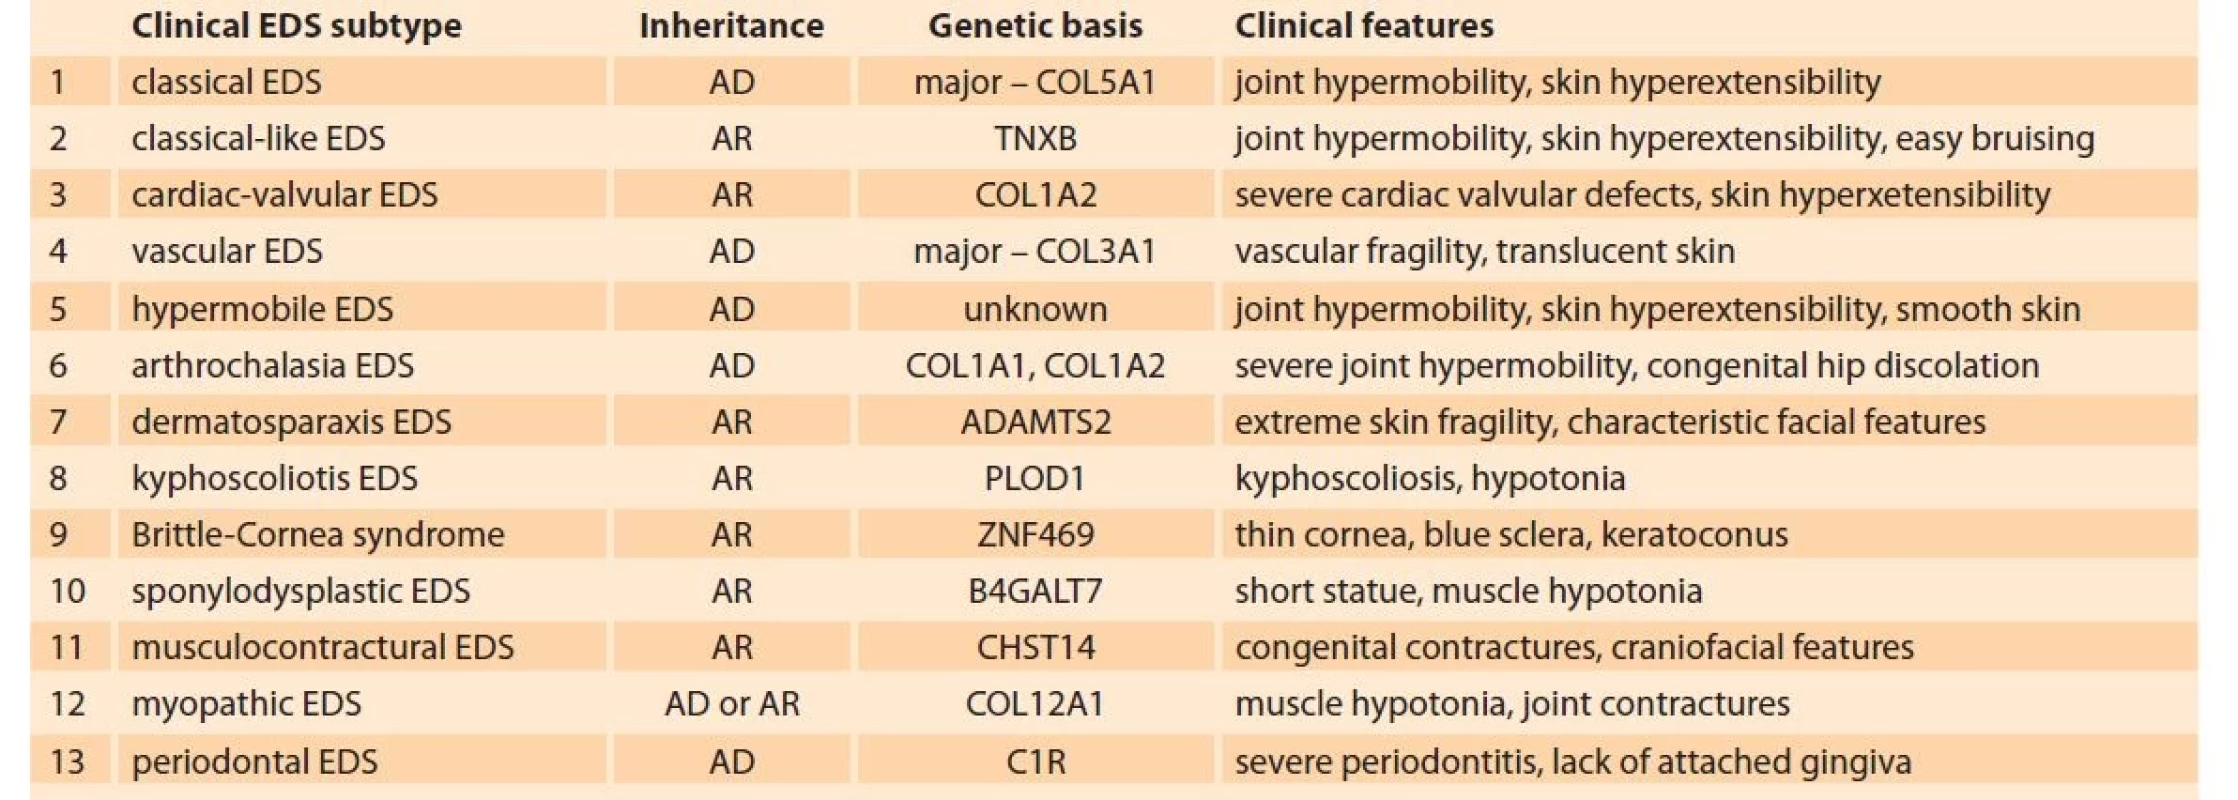 Clinical subtypes of Ehlers-Danlos syndrome and their main clinical features [7].<br>
Tab. 1. Klinické podtypy Ehlers-Danlosova syndromu a jejich hlavní klinické rysy [7].